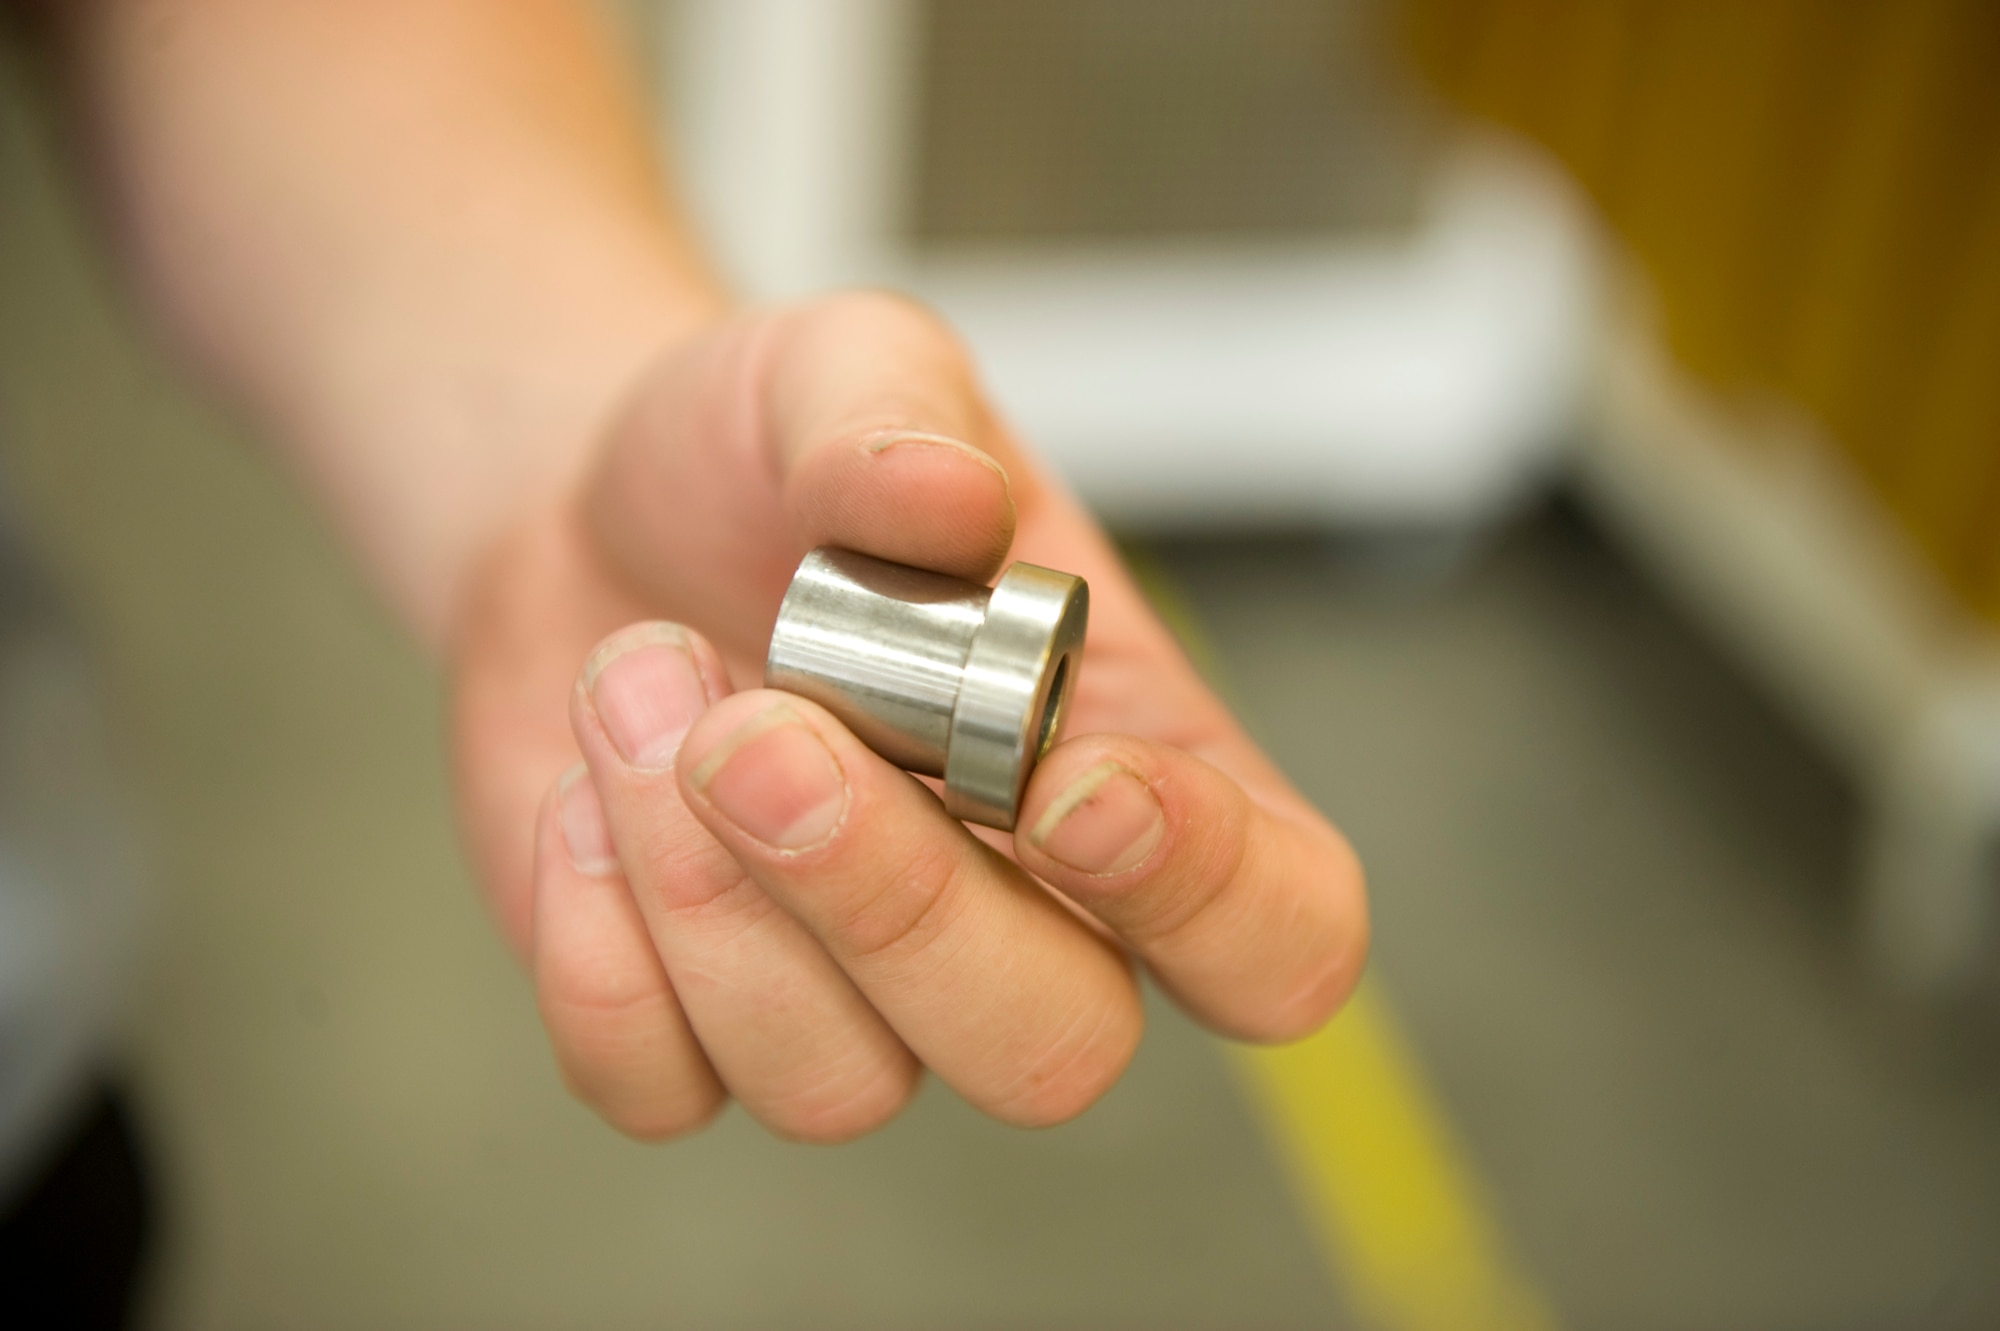 Nathan Reeder, 57th Maintanence Group aerospace machinist, holds up a bushing at the Aircraft Metals Technology shop on Nellis Air Force Base, Nev., Sept. 3, 2015. Metals technology workers are responsible for designing, welding, repairing and fabricating aircraft and aircraft ground equipment parts. (U.S. Air Force photo by Airman 1st Class Rachel Loftis)